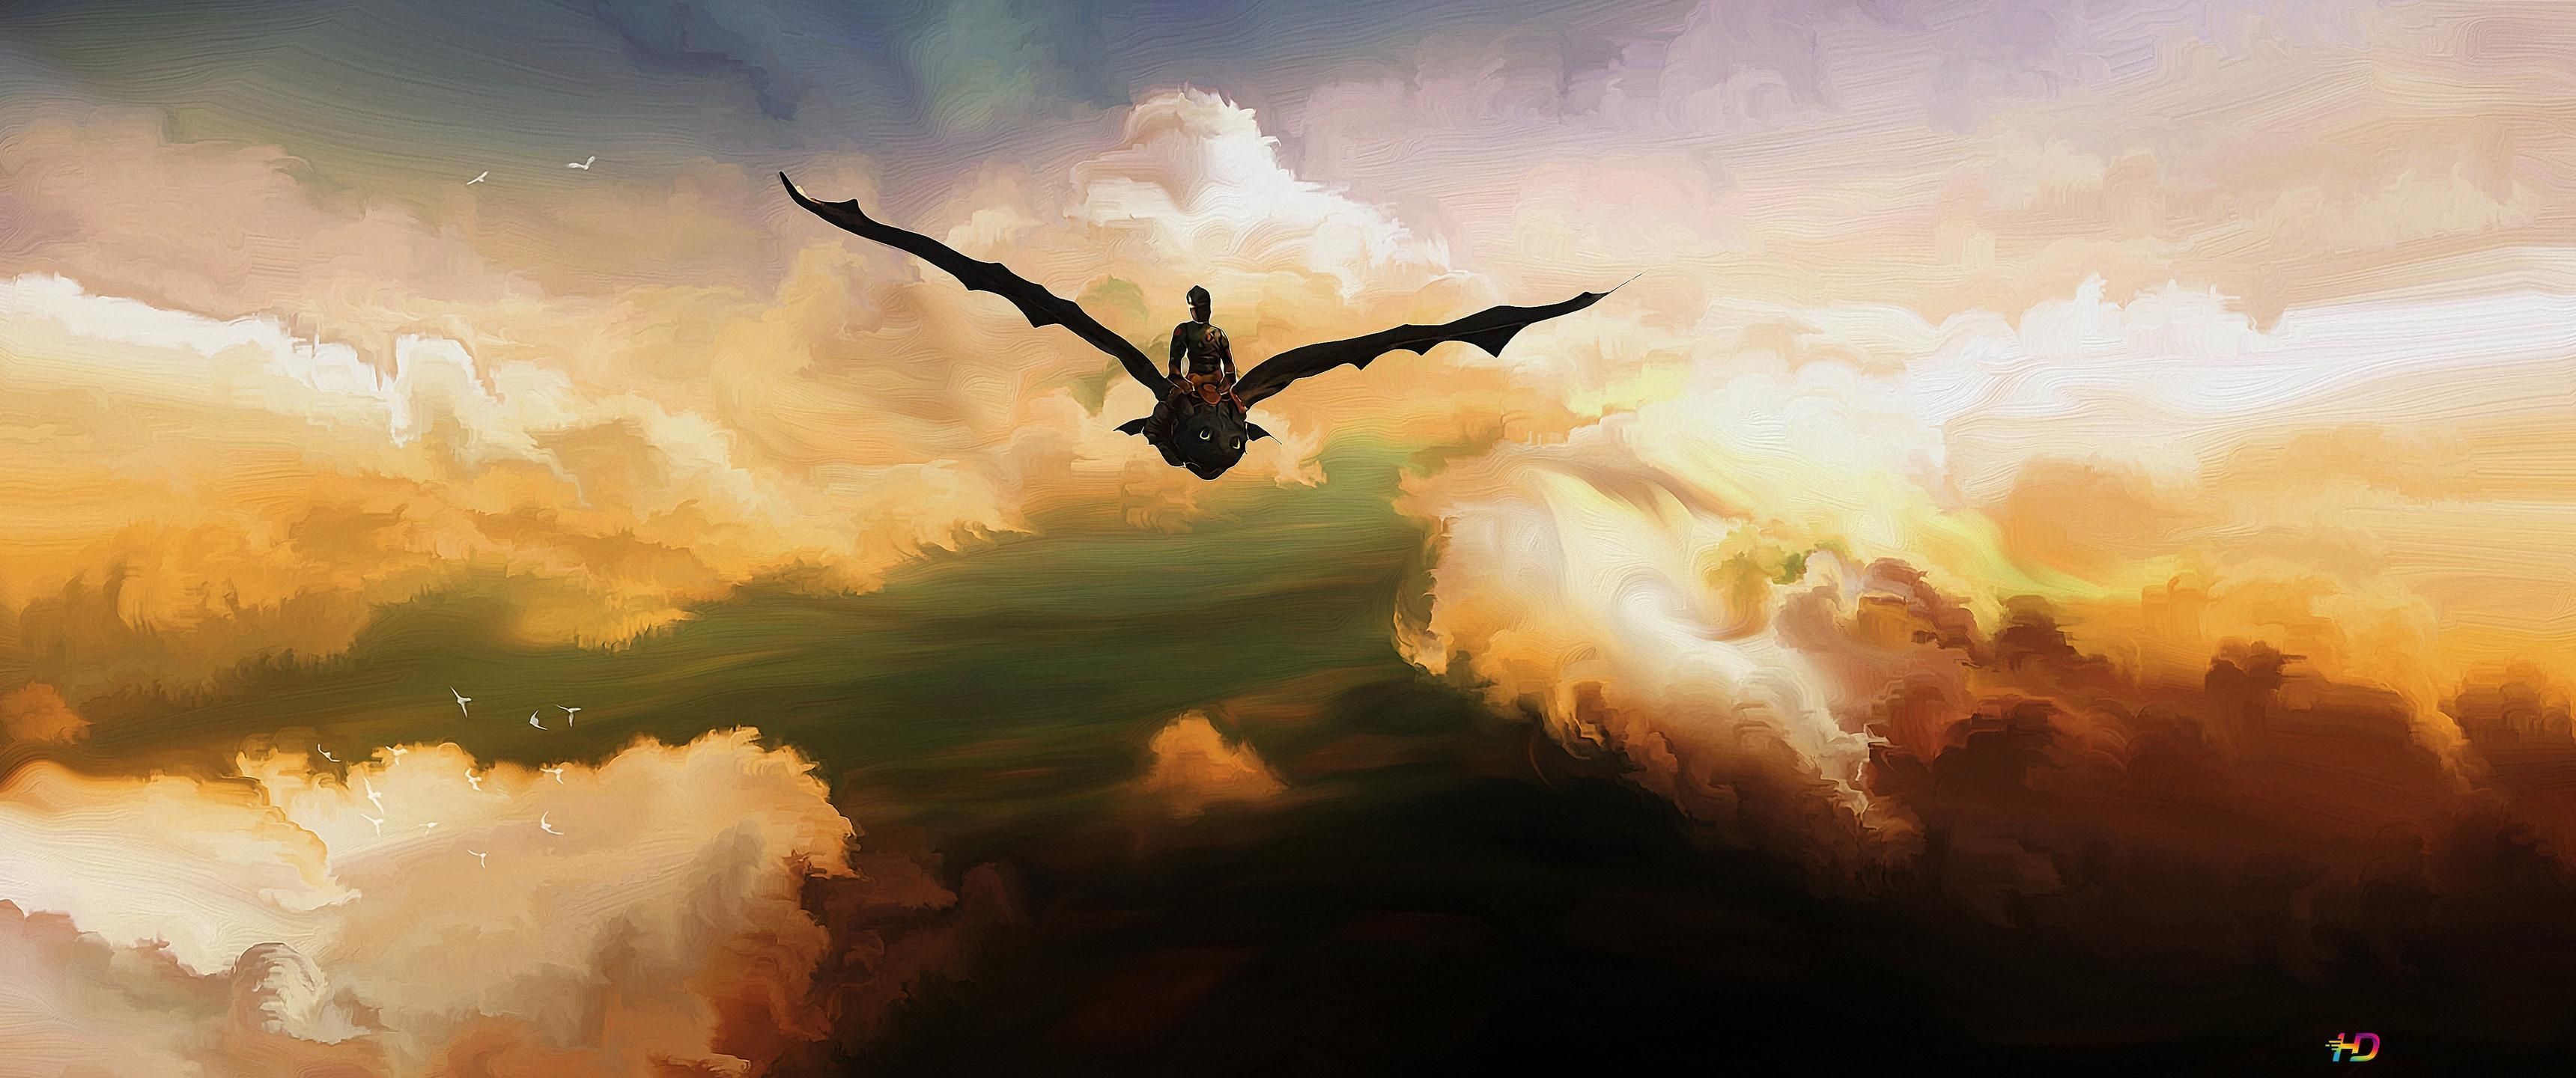 A painting of an eagle flying in the sky - 3440x1440